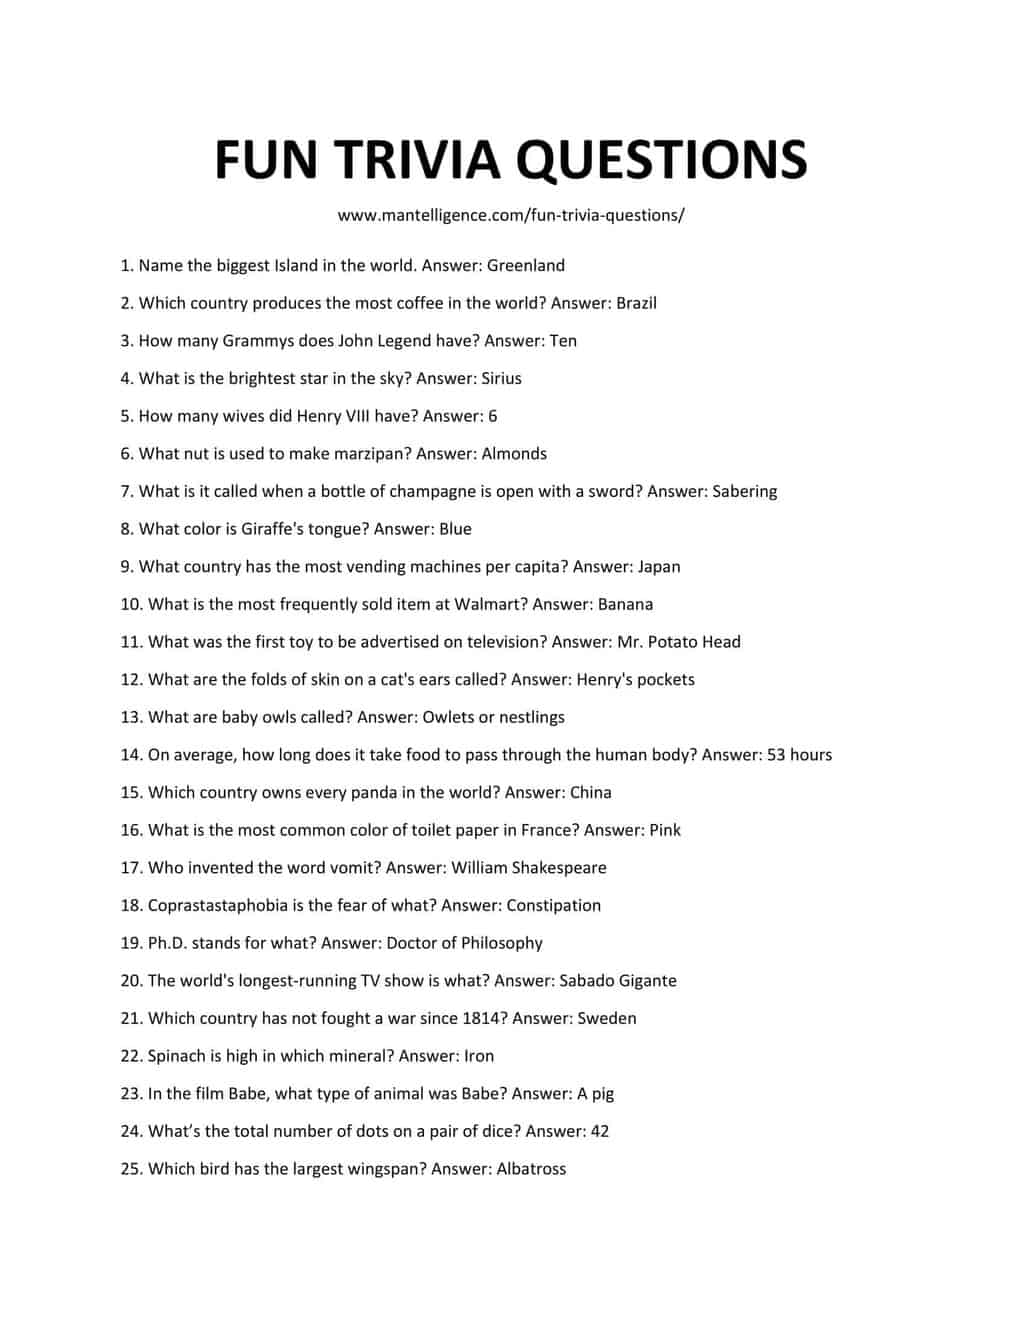 Downloadable and Printable List of Fun Trivia Questions